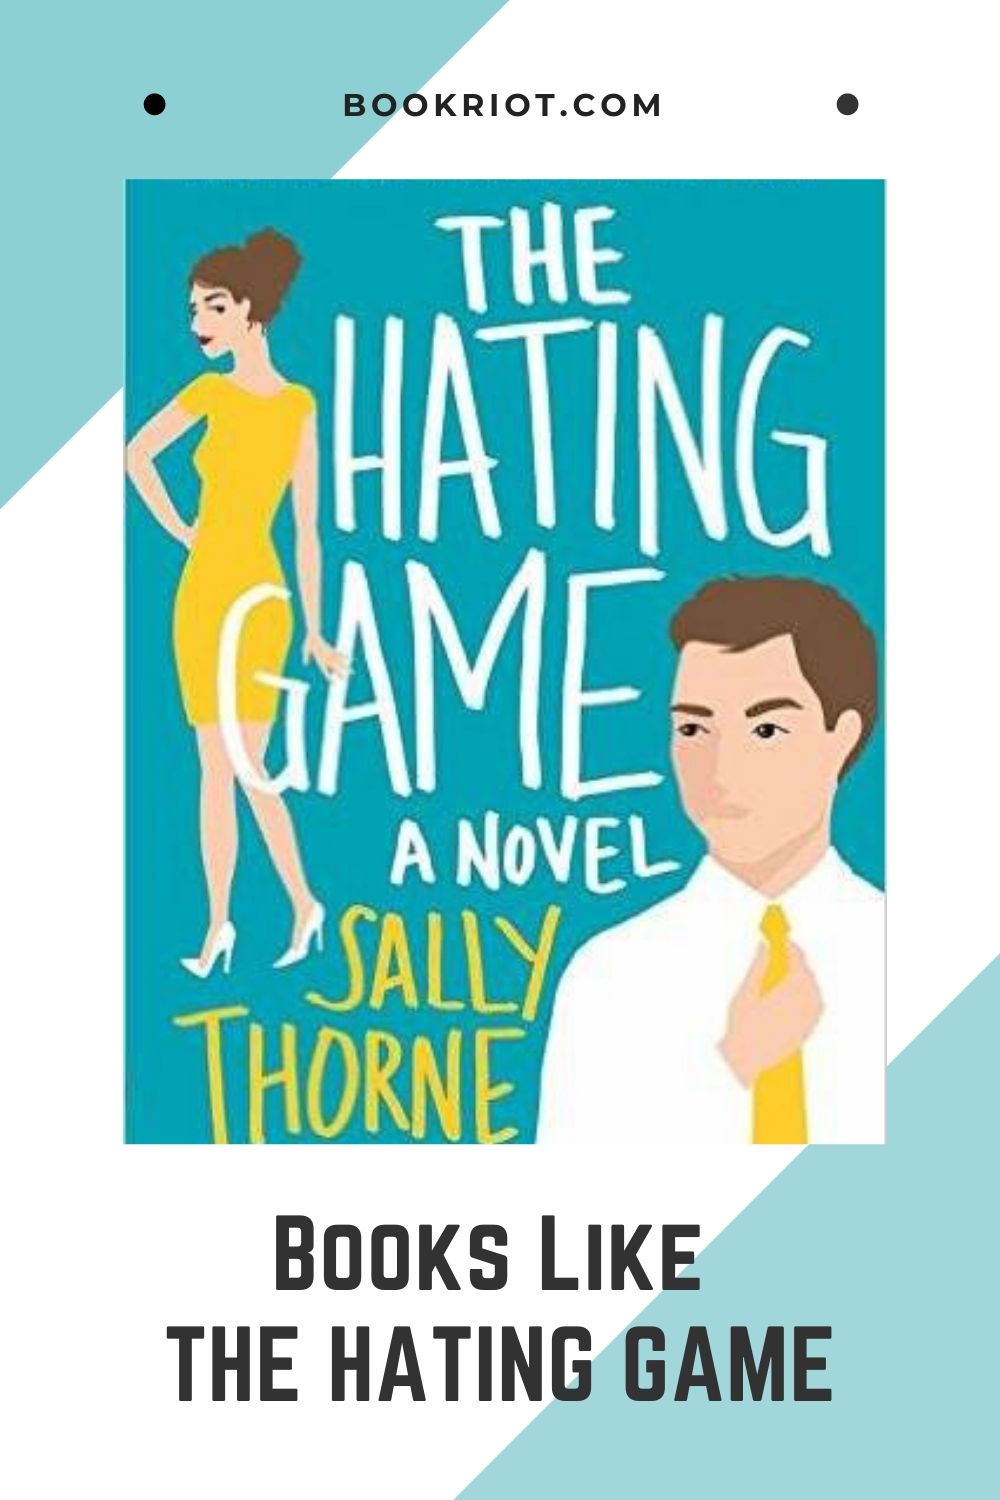 the hating game book barnes and noble